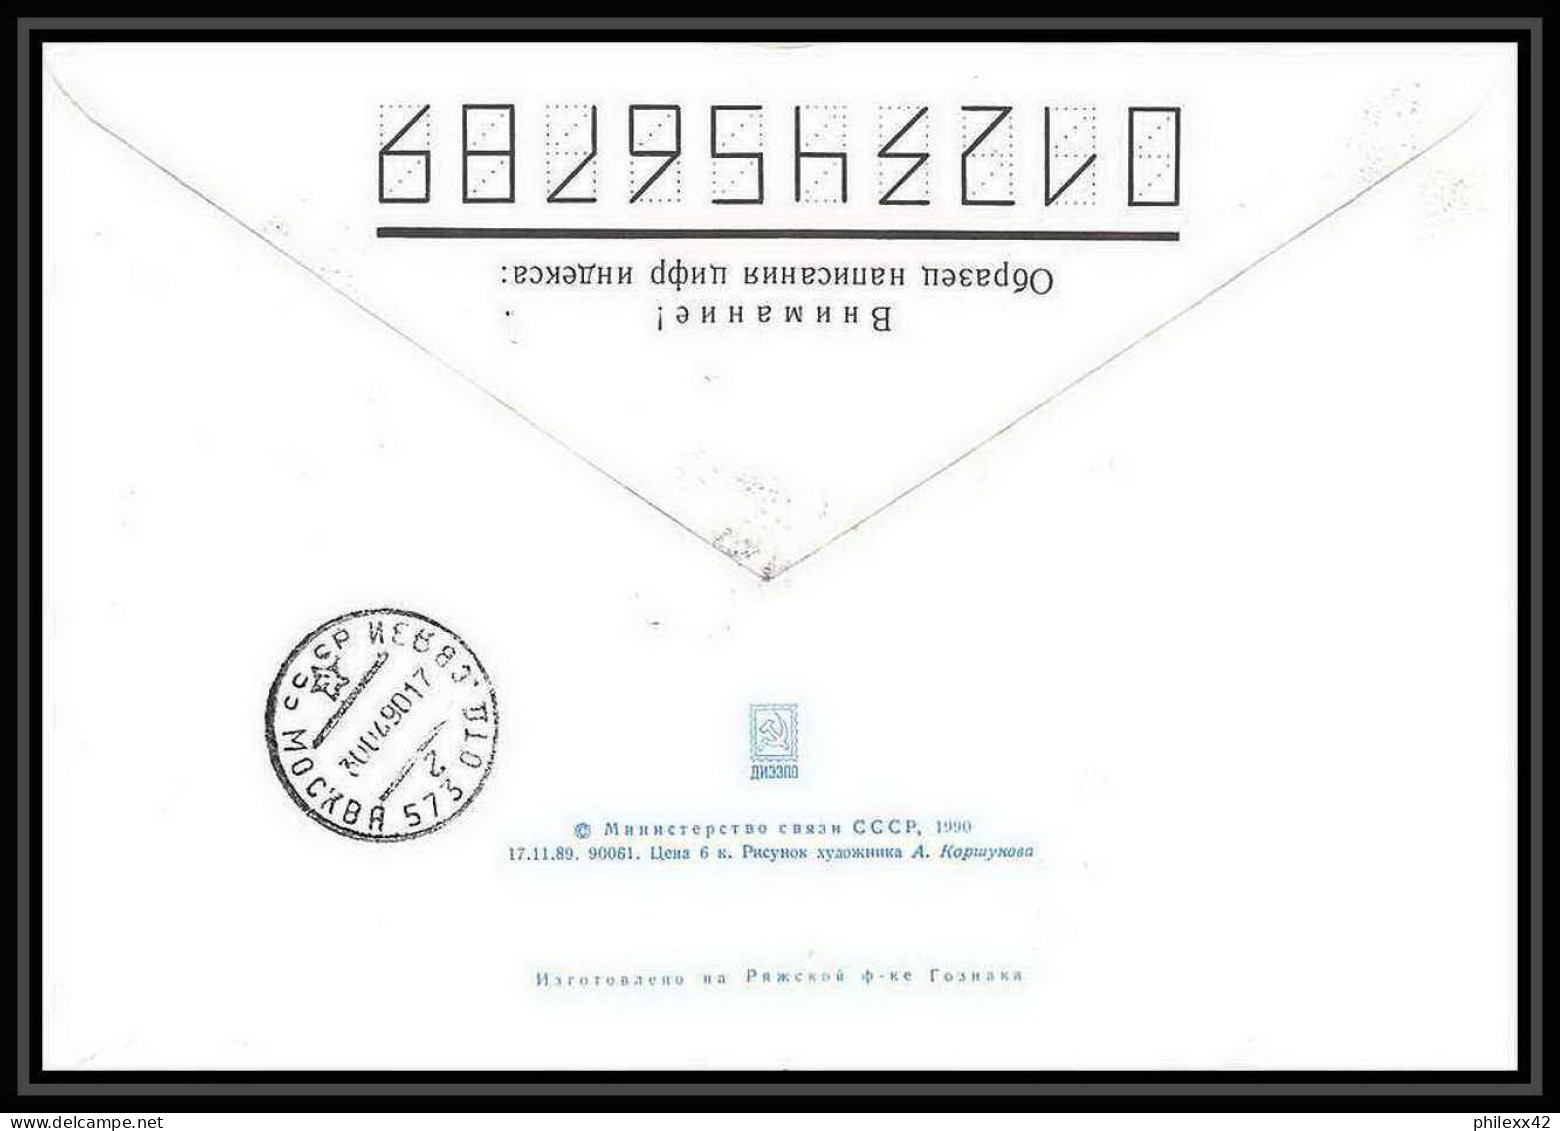 10062/ Espace (space) Entier Postal (Stamped Stationery) 12/4/1990 DAY OF COSMONAUTIC (urss USSR) - Russia & URSS